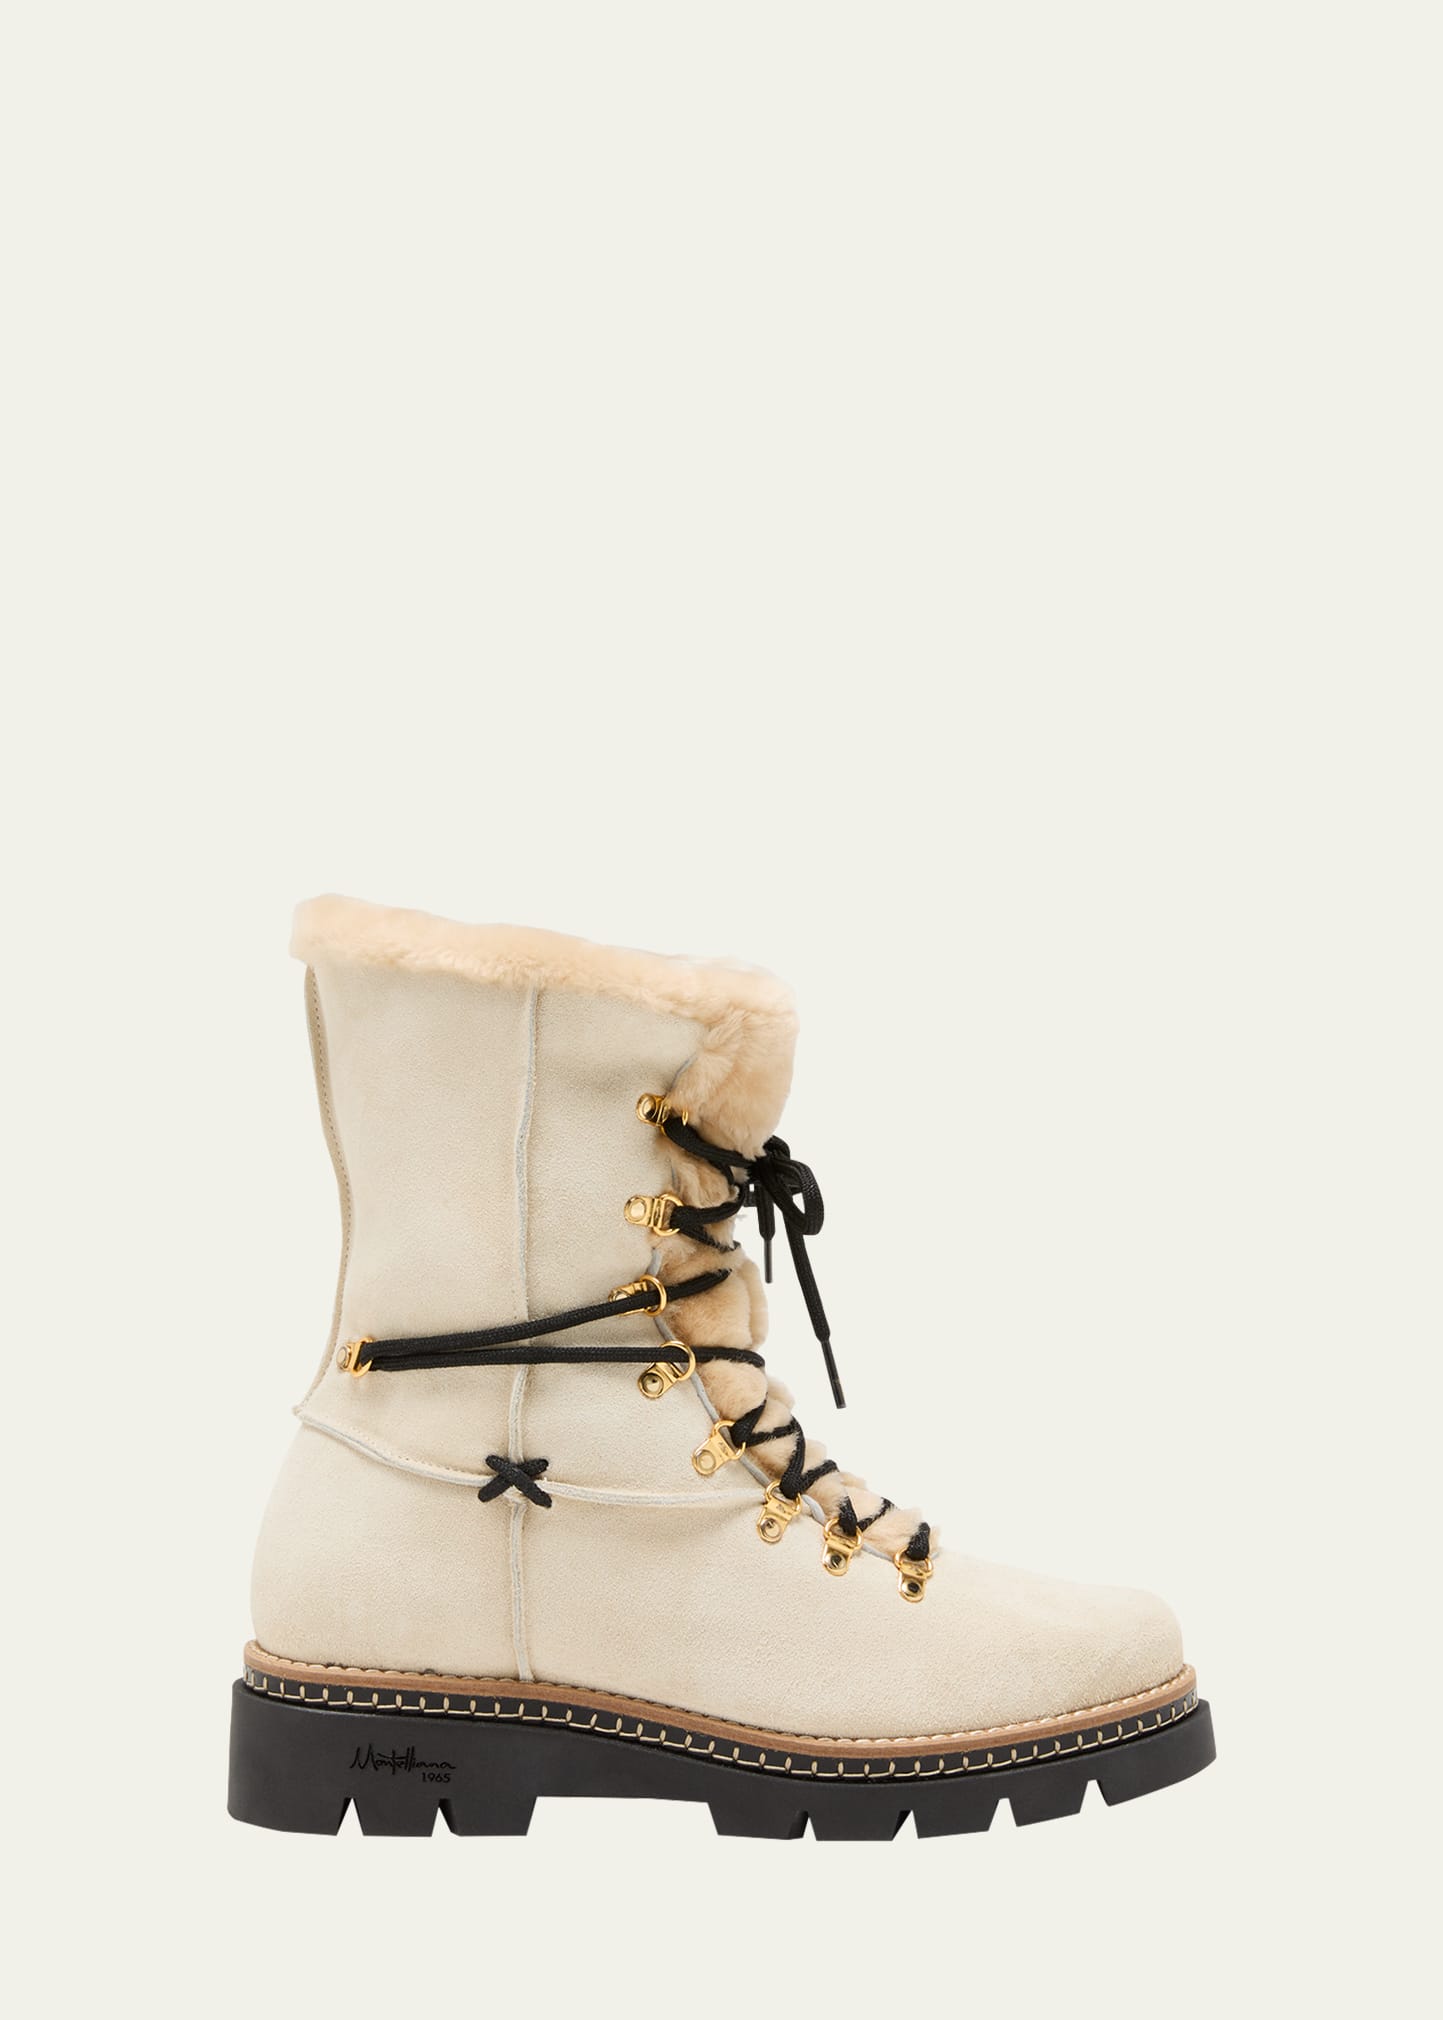 Shearling-Lined Leather Hiking Boots